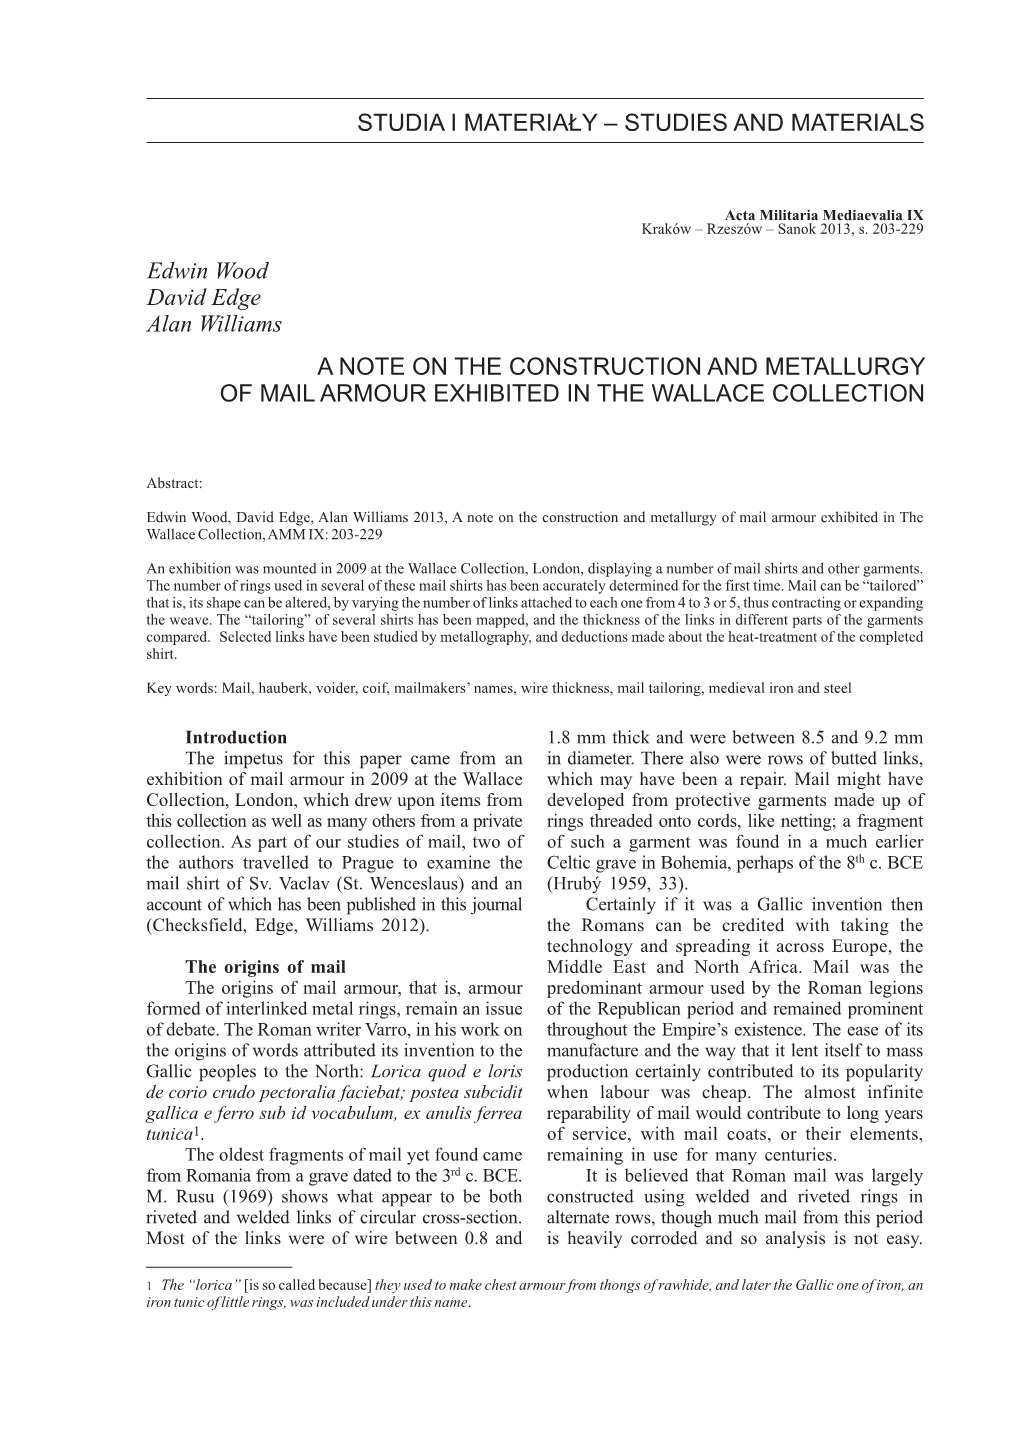 Edwin Wood, David Edge, Alan Williams 2013, a Note on the Construction and Metallurgy of Mail Armour Exhibited in the Wallace Collection, AMM IX: 203-229